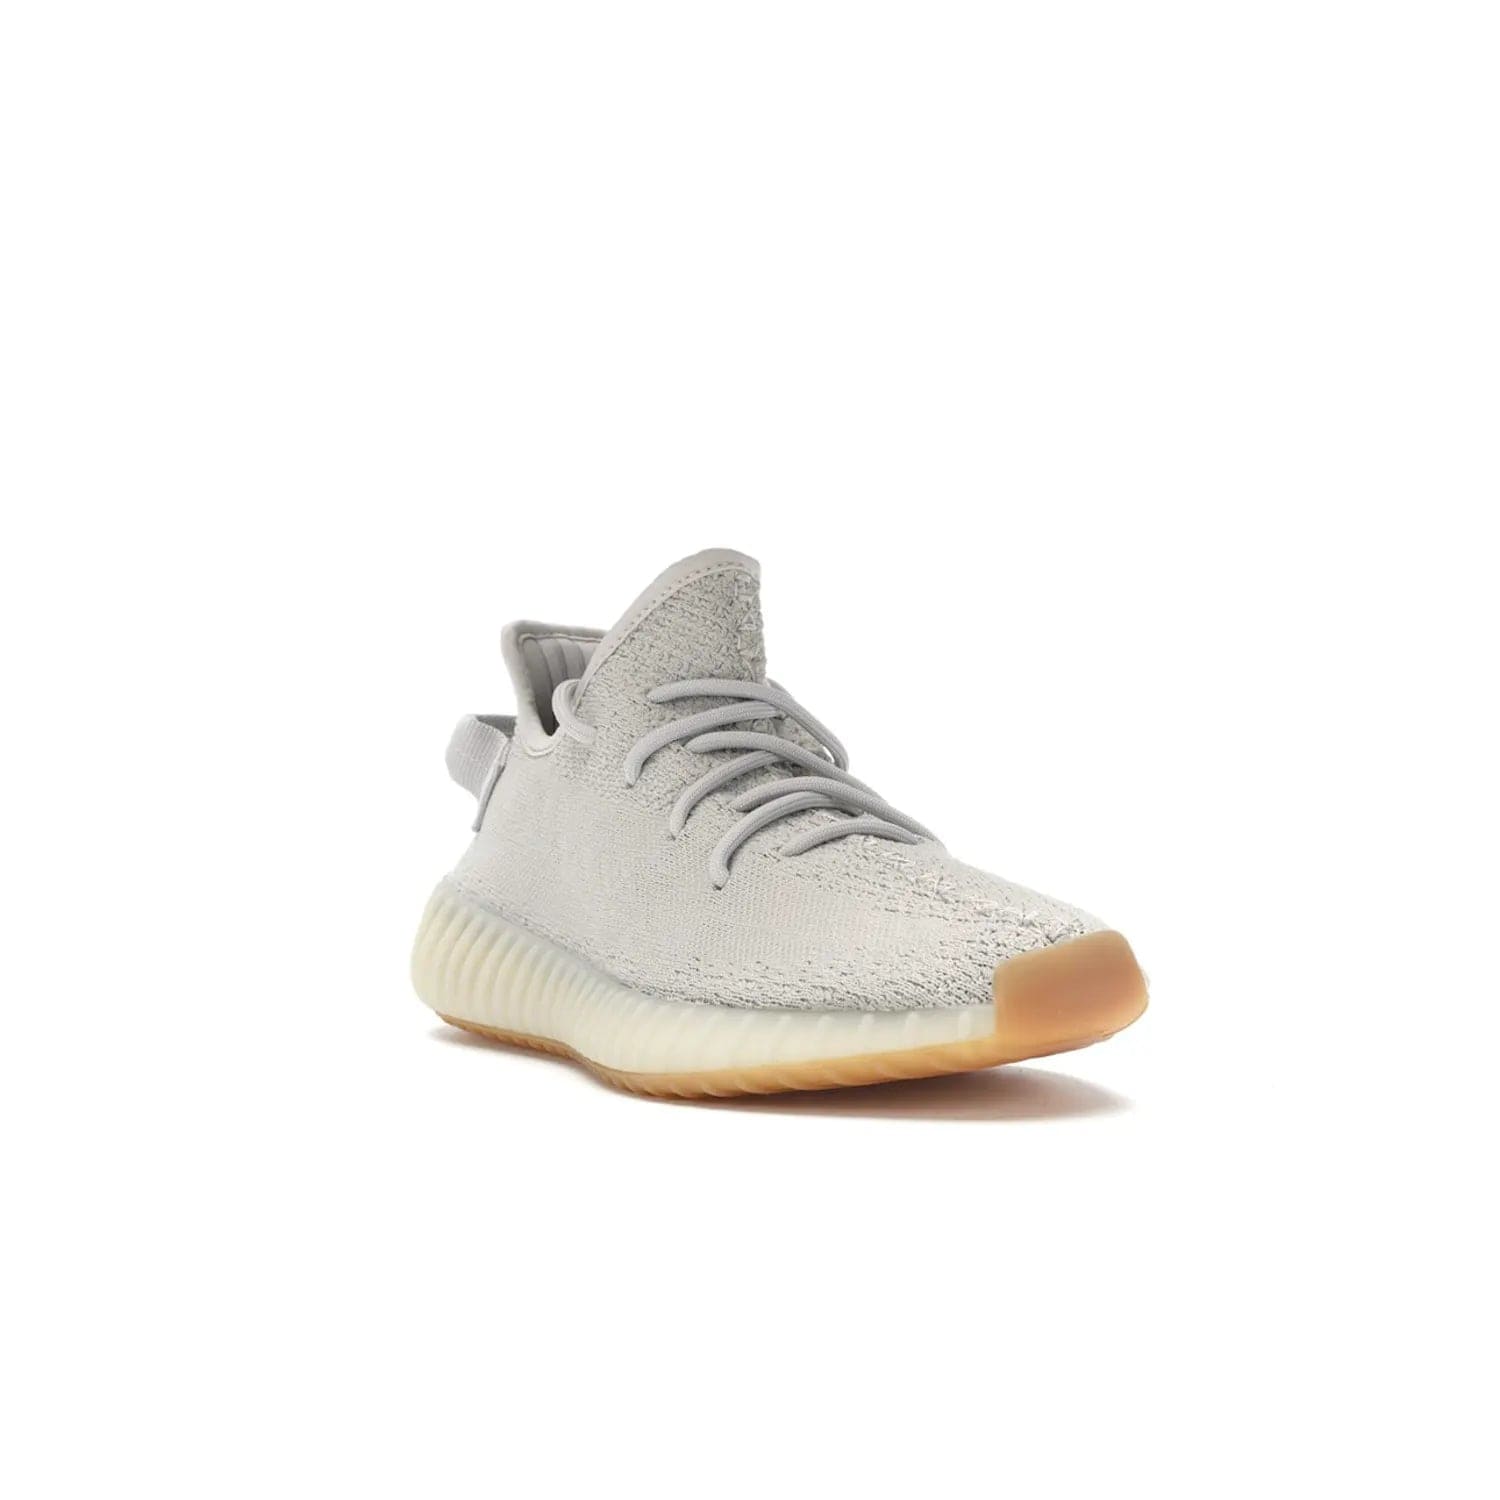 adidas Yeezy Boost 350 V2 Sesame - Image 7 - Only at www.BallersClubKickz.com - Introducing the adidas Yeezy Boost 350 V2 Sesame. Featuring a sesame upper, midsole and gum sole for a sleek silhouette. Cop the stylish sneaker released in November 2018.